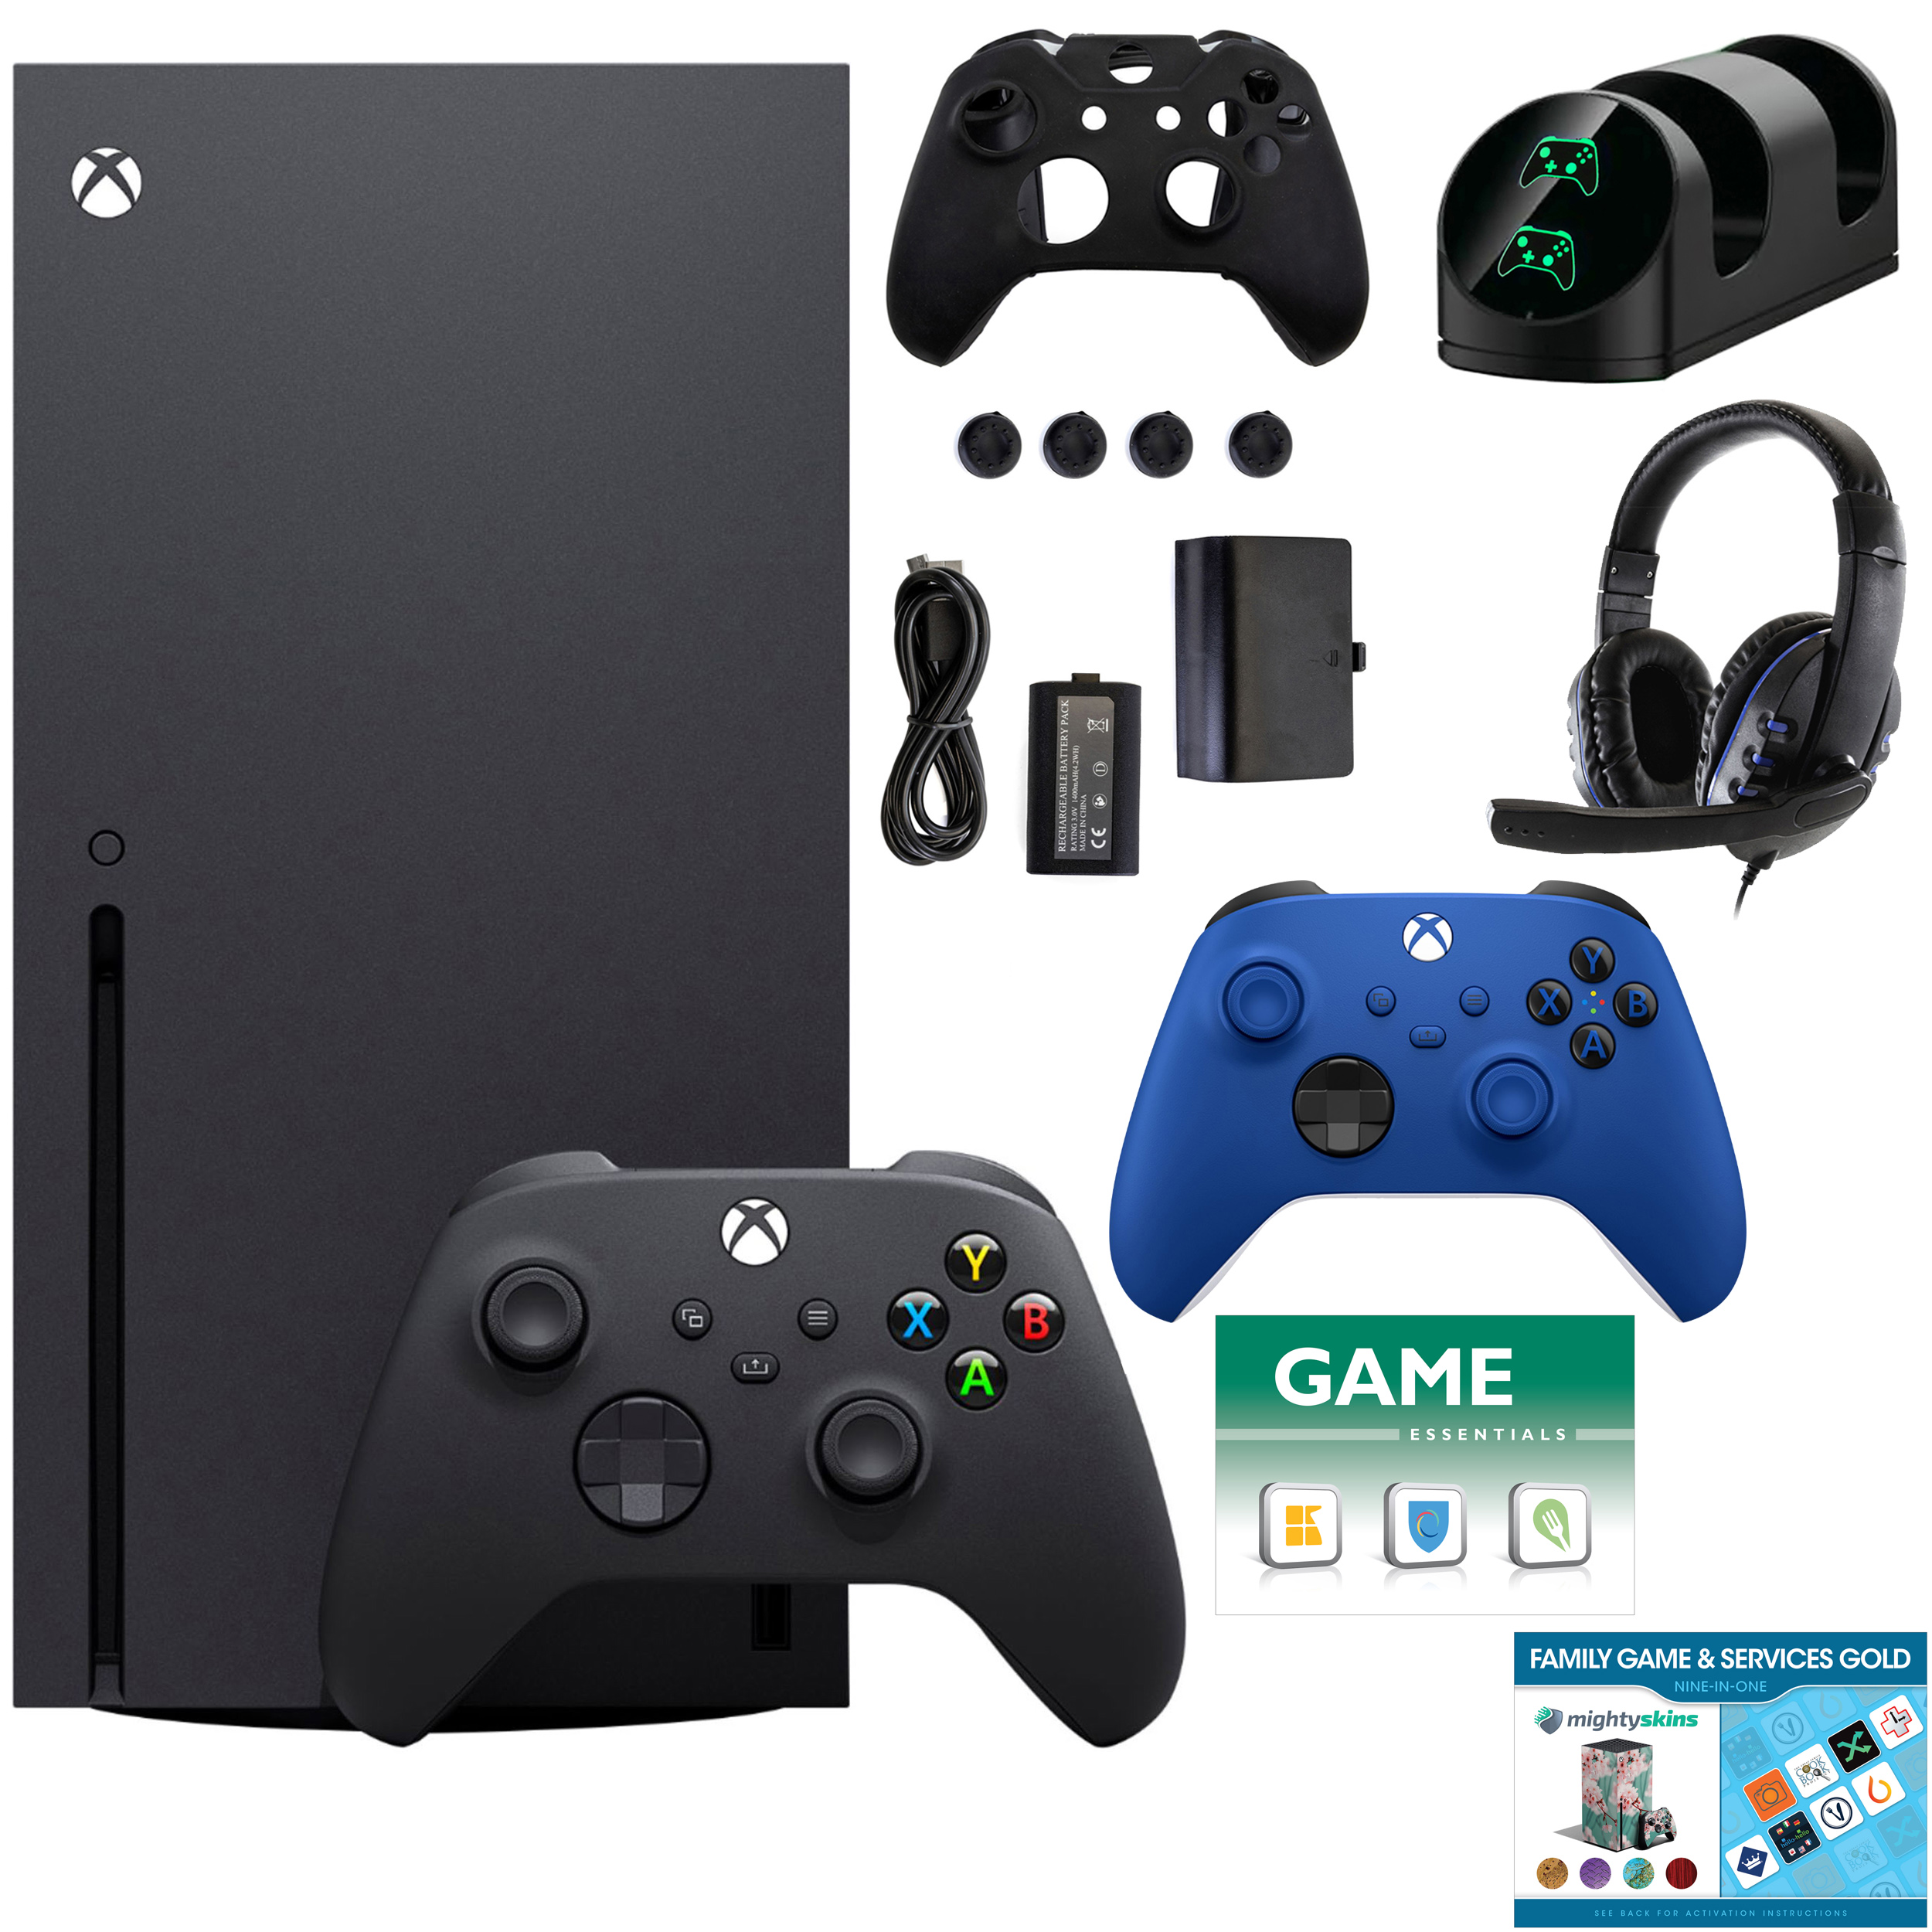 Microsoft Xbox Series X 1TB Console with Extra Blue Controller Accessories Kit and 2 Vouchers